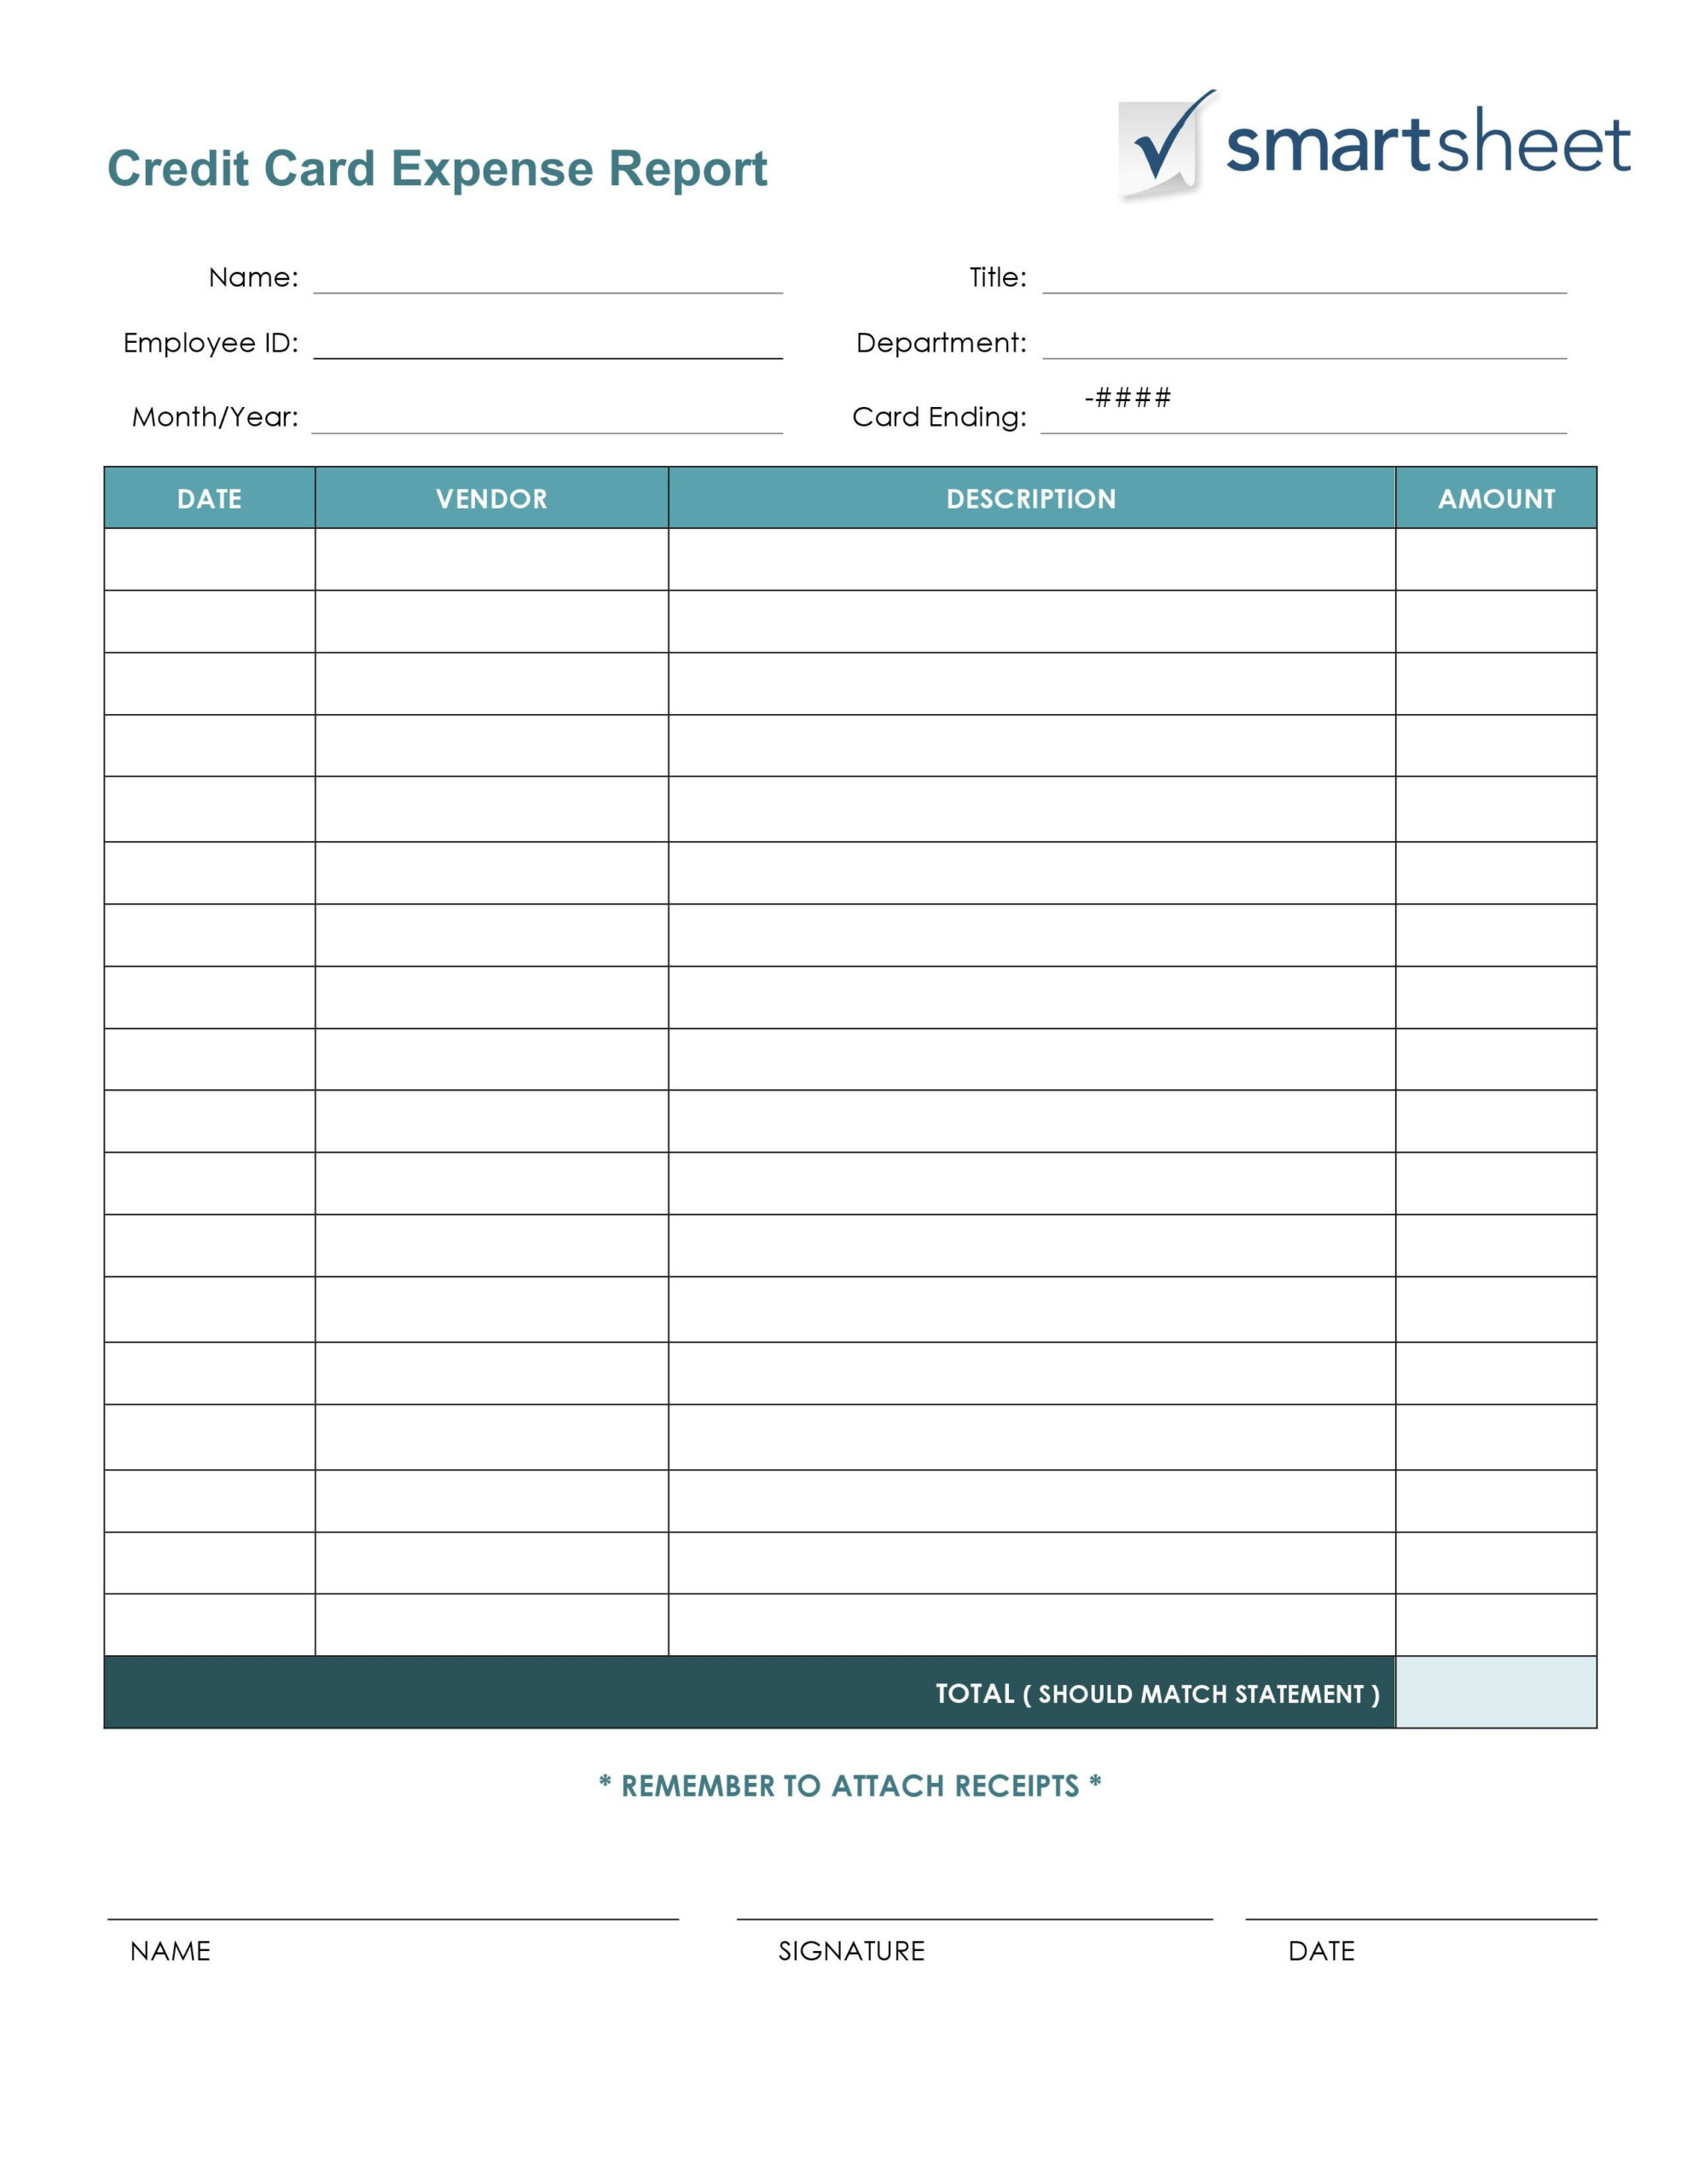 New Daily Expenses Excel Template #exceltemplate #xls With Boyfriend Report Card Template